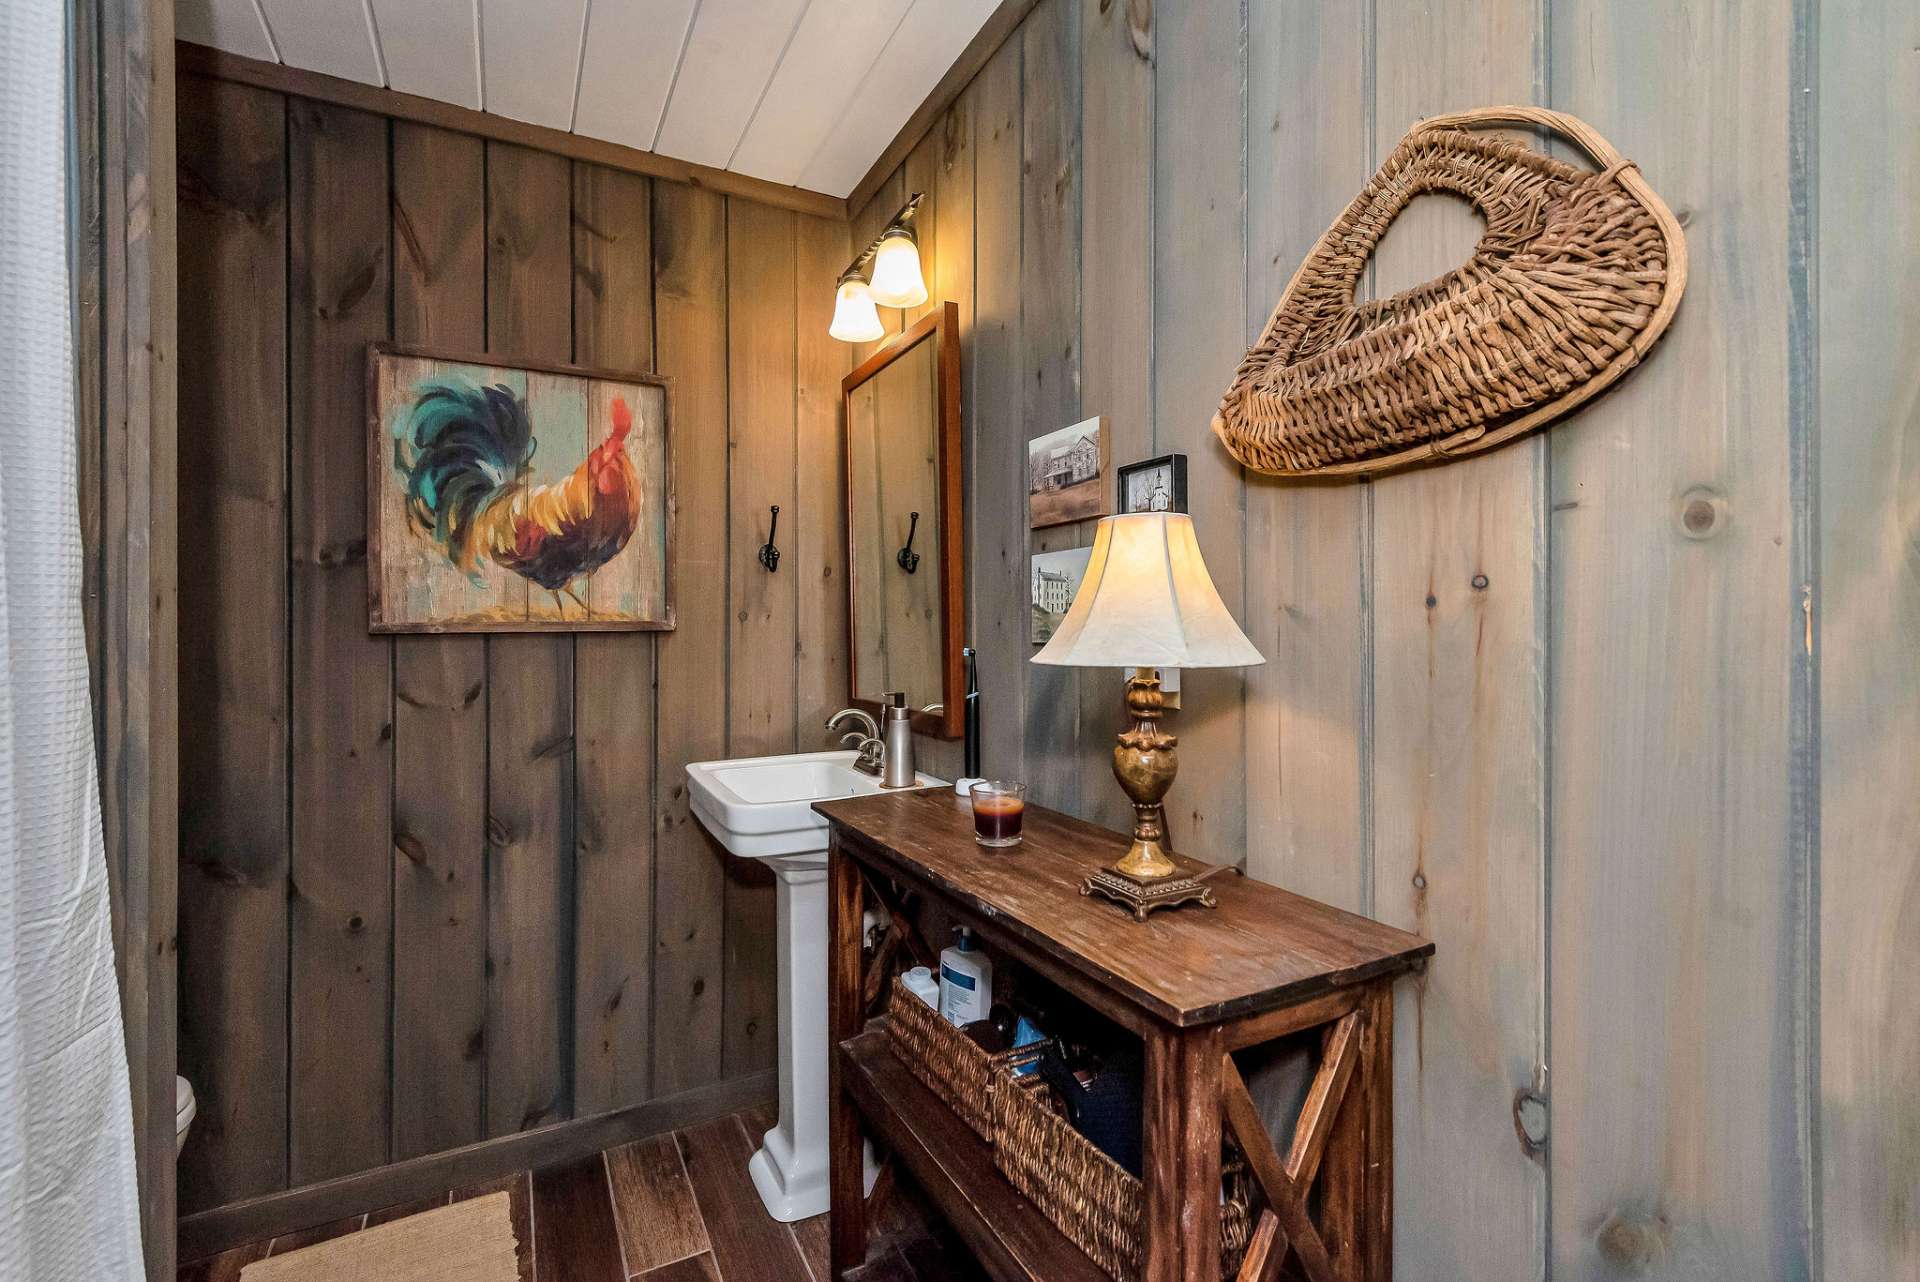 The lower level bathroom complements the cabin's overall rustic vibe and features a shower with a seat, a pedestal sink and a rustic piece of furniture which provides both storage and character.